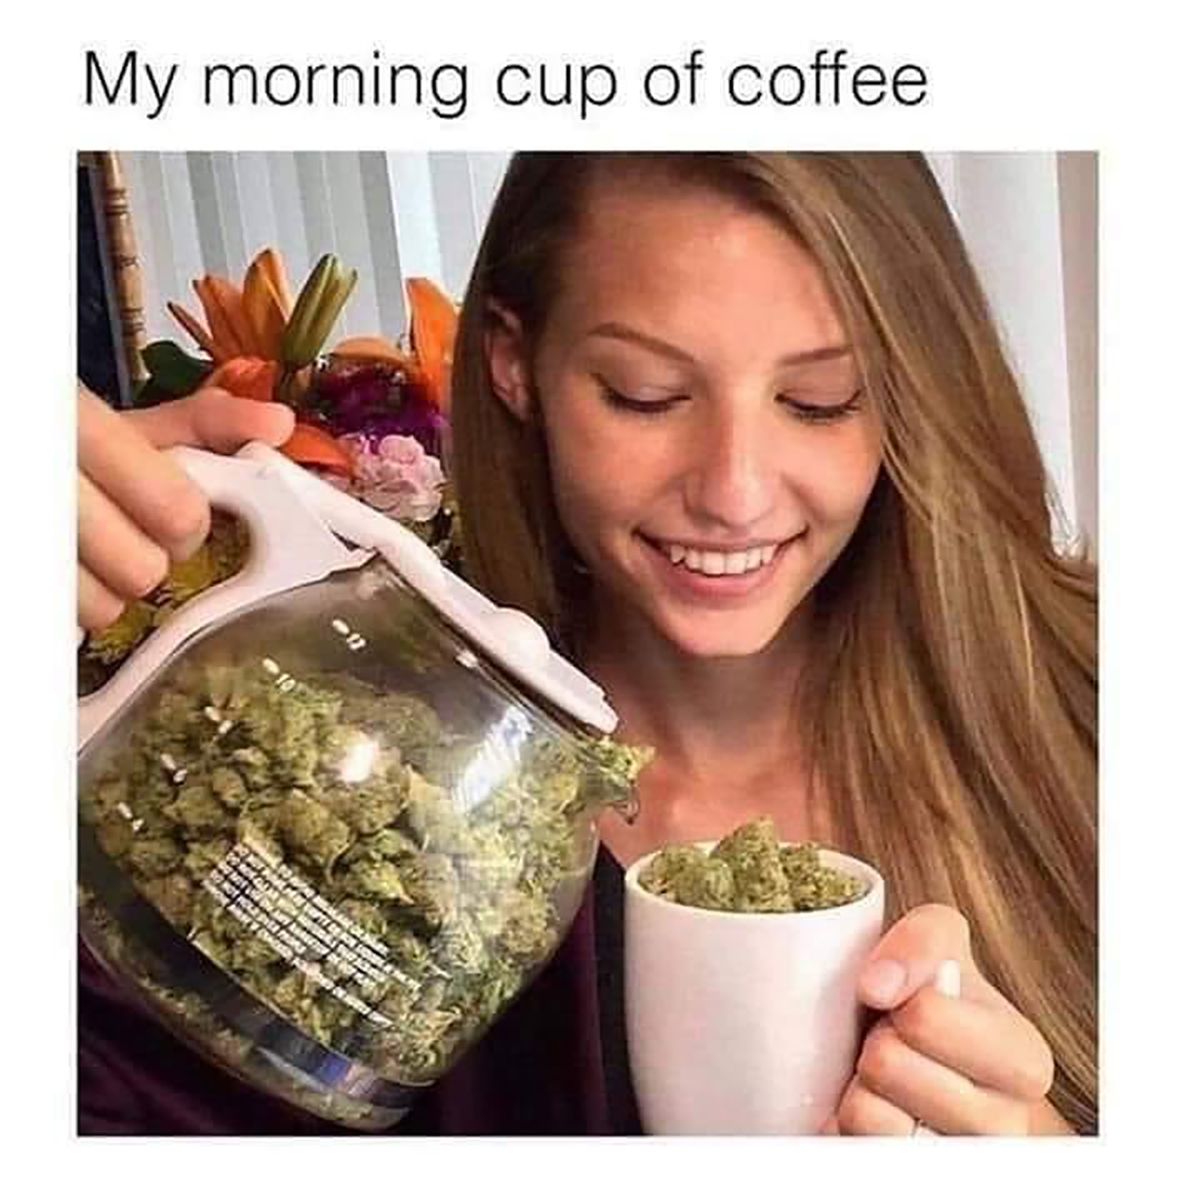 dank memes - best part of waking up weed meme - My morning cup of coffee